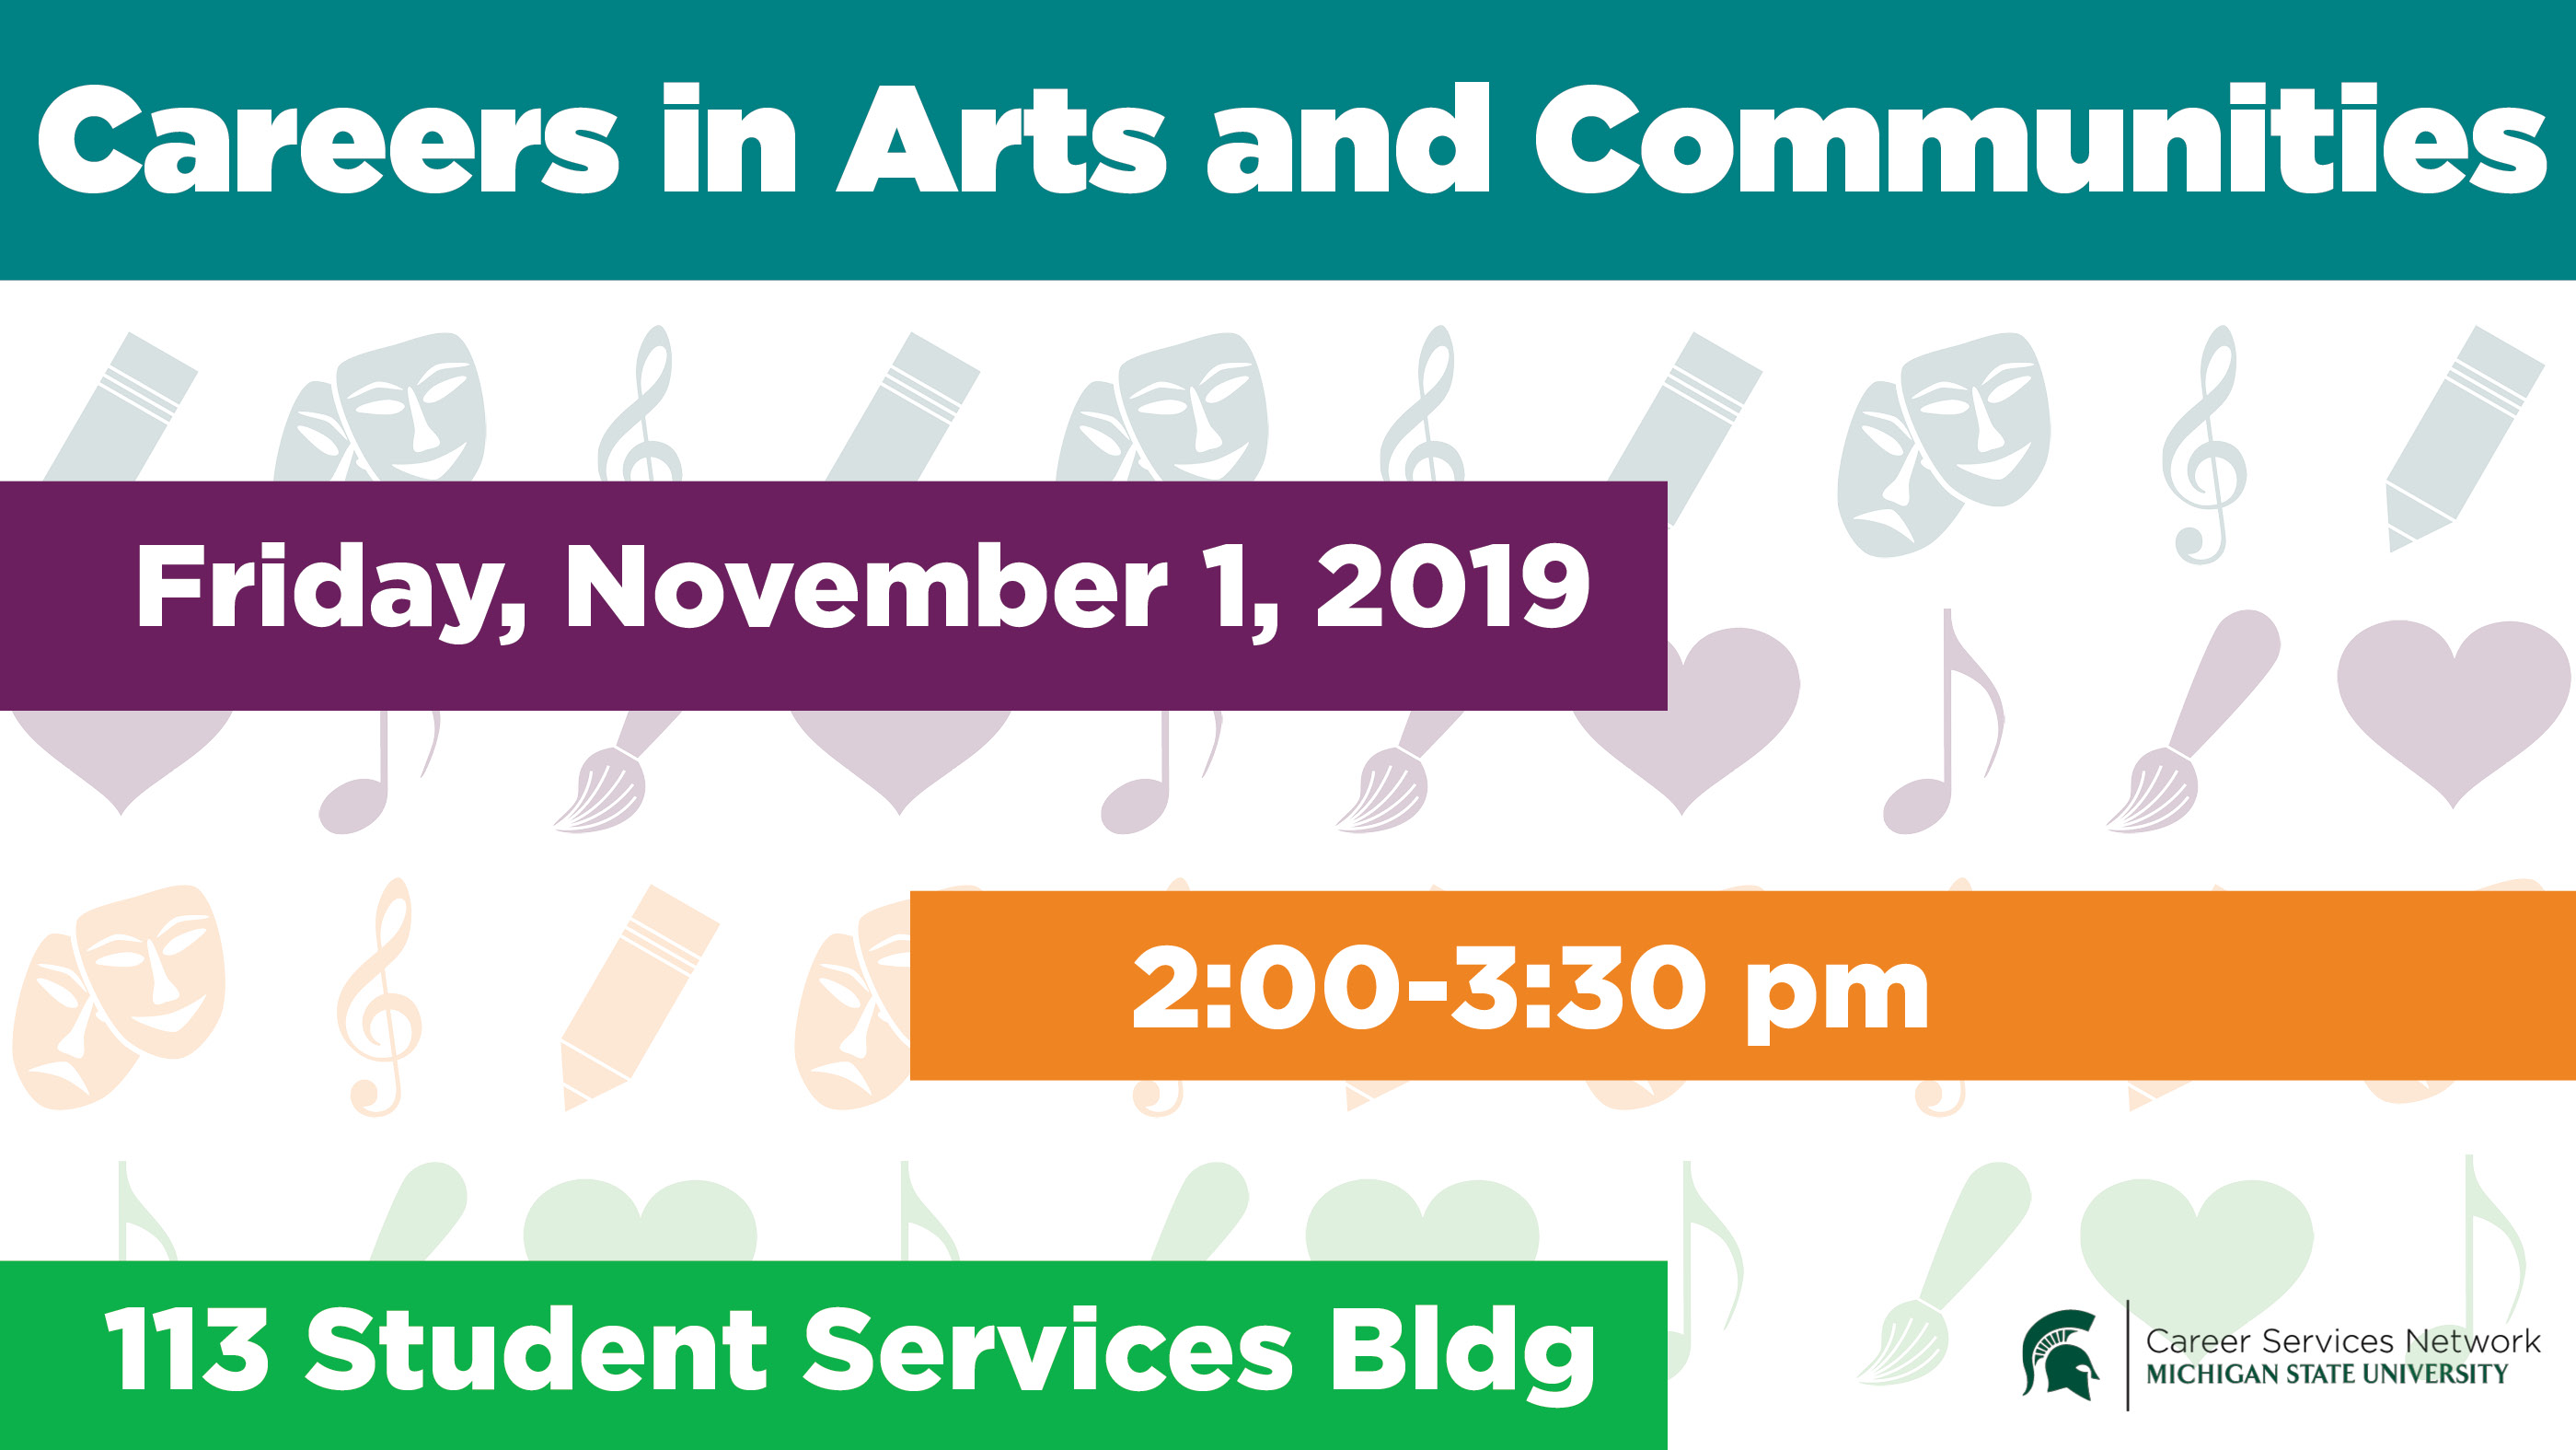 Careers in Arts and Communities